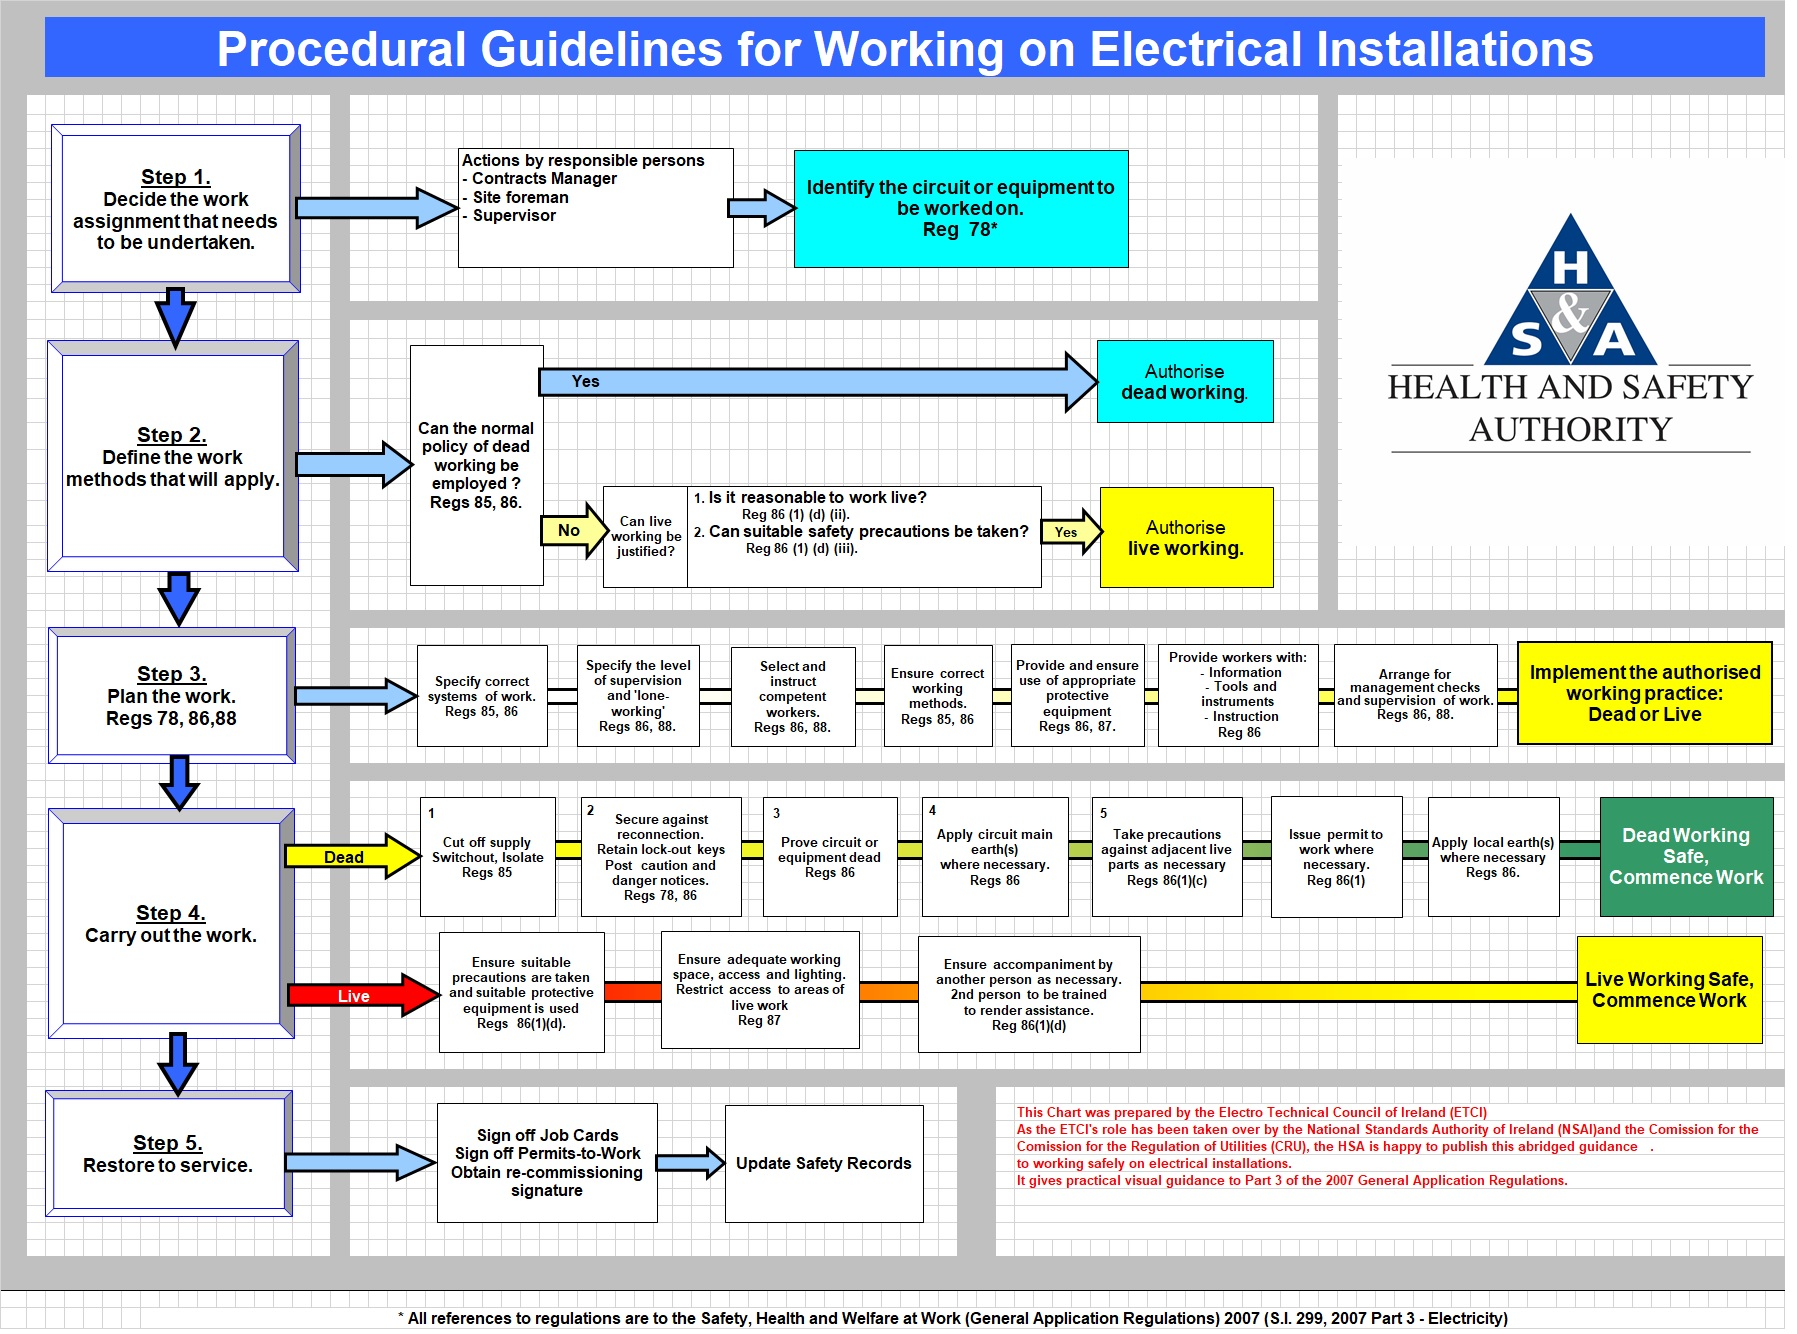 Procedural Guidelines for Elec Installations